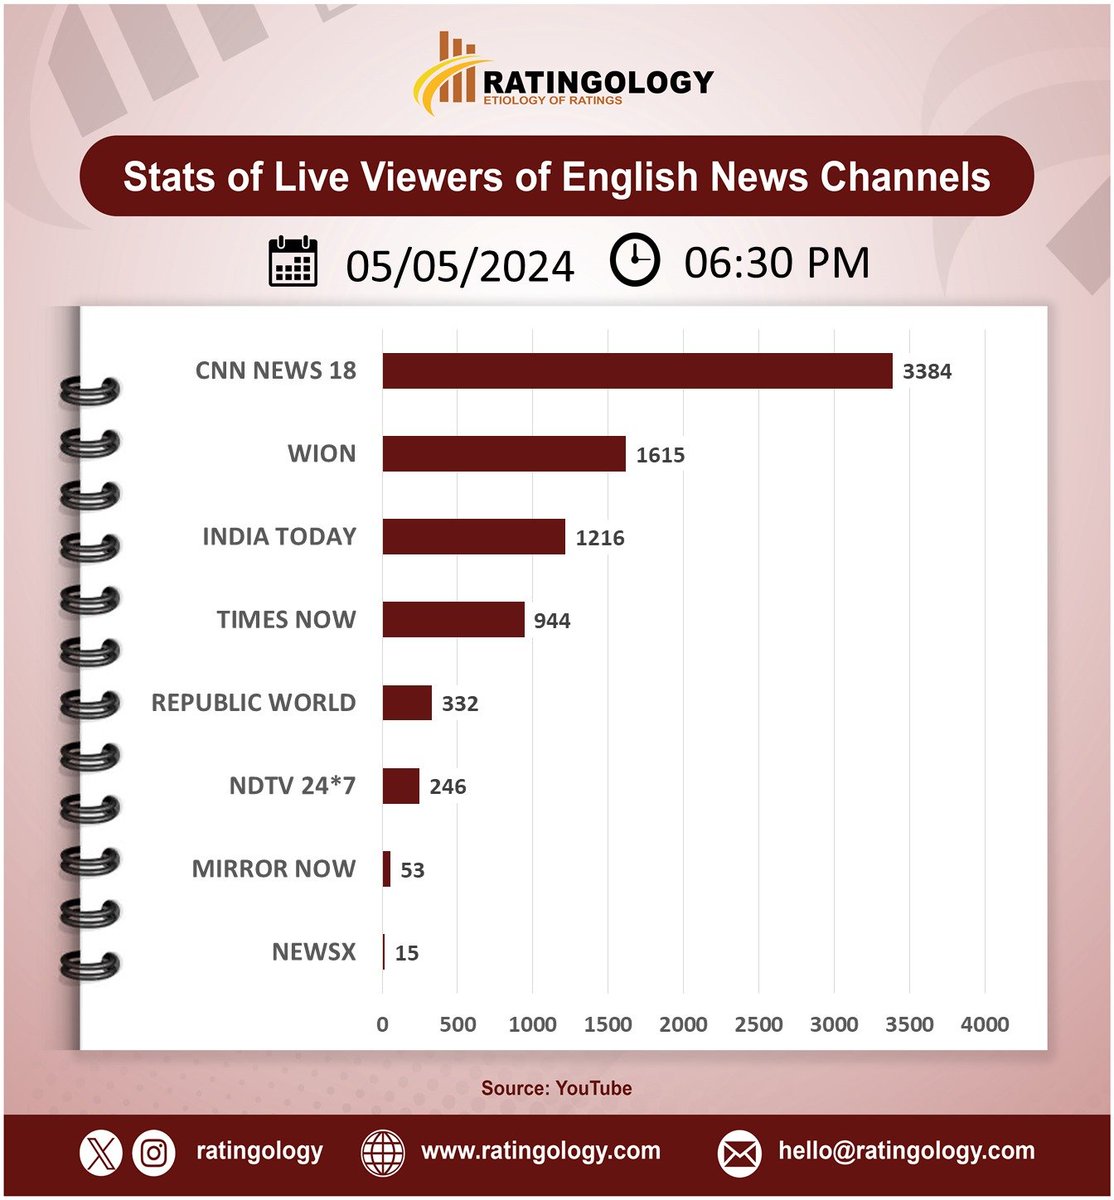 𝐒𝐭𝐚𝐭𝐬 𝐨𝐟 𝐥𝐢𝐯𝐞 𝐯𝐢𝐞𝐰𝐞𝐫𝐬 𝐨𝐧 #Youtube of #EnglishMedia #channelsat 06:30pm, Date: 05/May/2024 #Ratingology #Mediastats #RatingsKaBaap #DataScience #IndiaToday #Wion #RepublicTV #CNNNews18 #TimesNow #NewsX #NDTV24x7 #MirrorNow